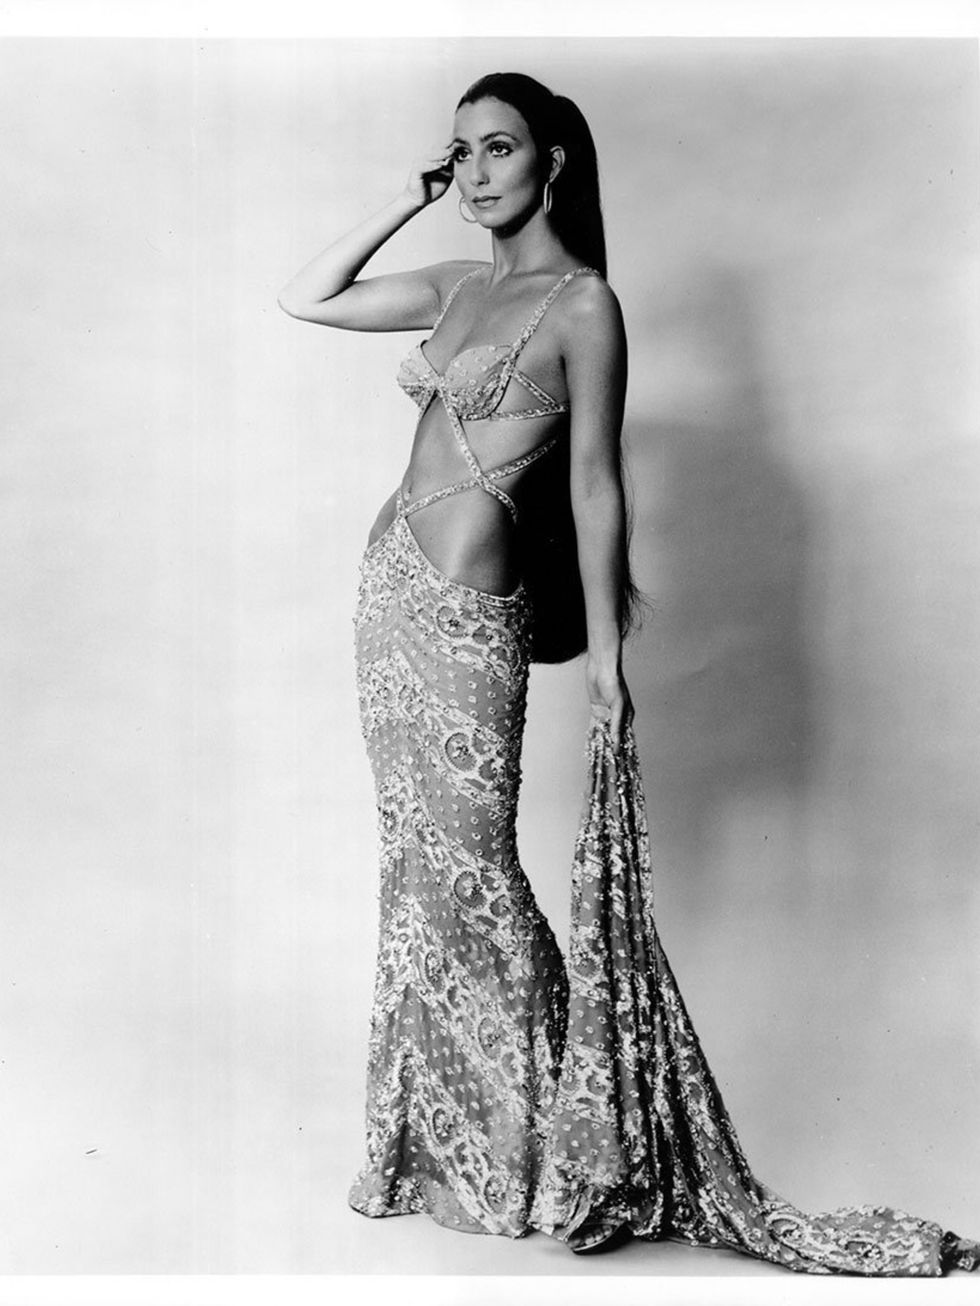 &lt;p&gt;Cher in 1972.&lt;/p&gt;&lt;p&gt;&lt;a href=&quot;http://www.elleuk.com/star-style/celebrity-style-files/timeless-glamour-fashion-icons-joan-collins-judi-dench-jane-fonda&quot;&gt;&lt;/a&gt;&lt;/p&gt;&lt;p&gt;&lt;em&gt;&lt;a href=&quot;http://www.